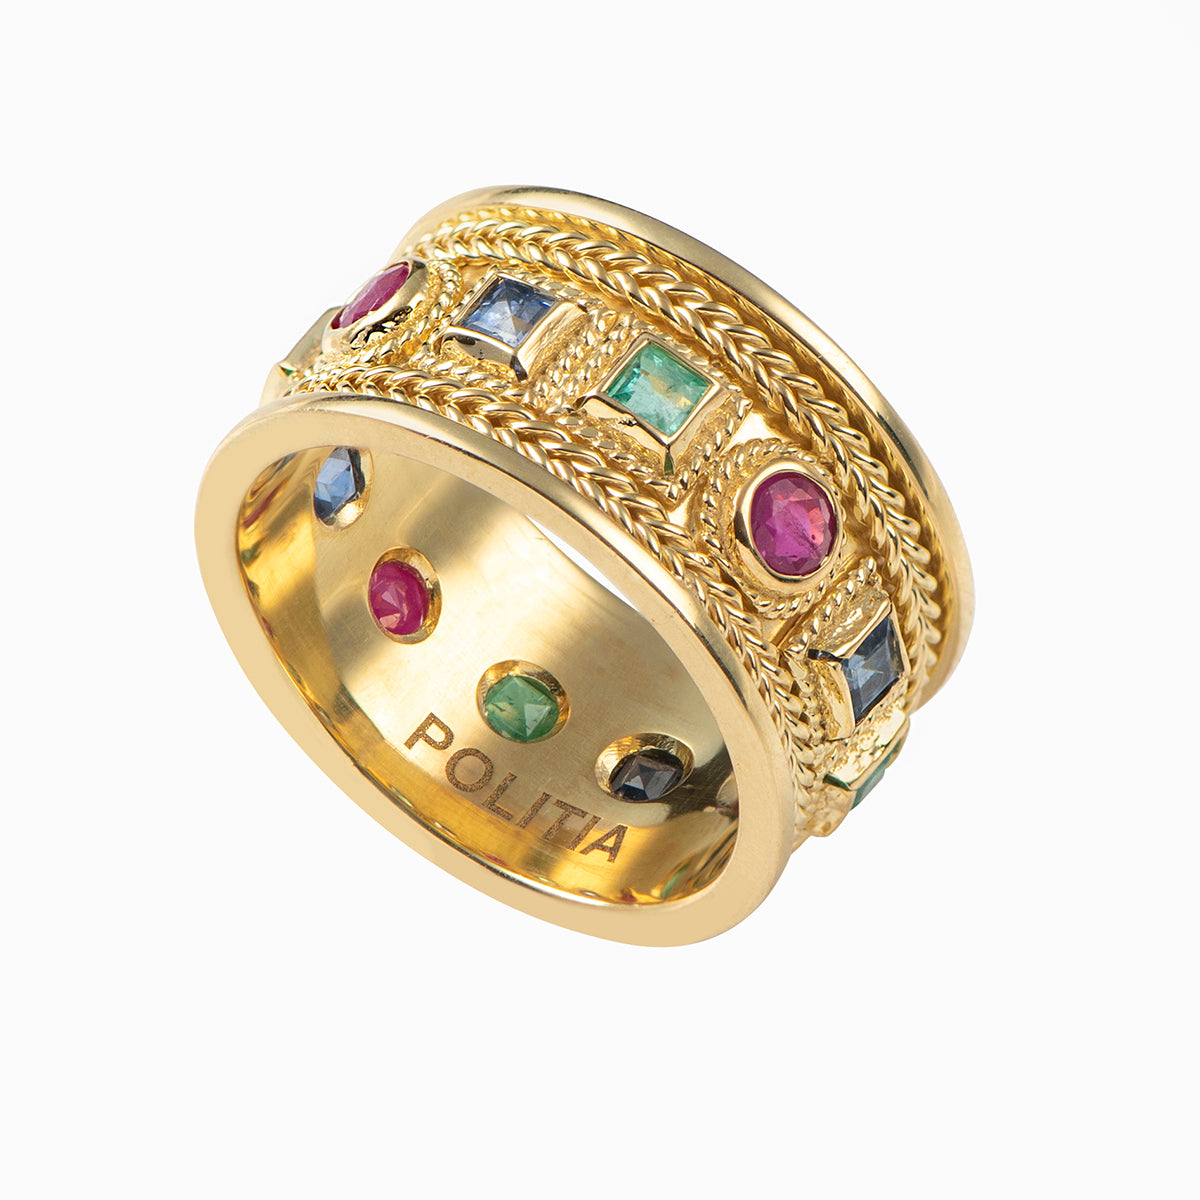 The 'Queen's' Byzantine Ring